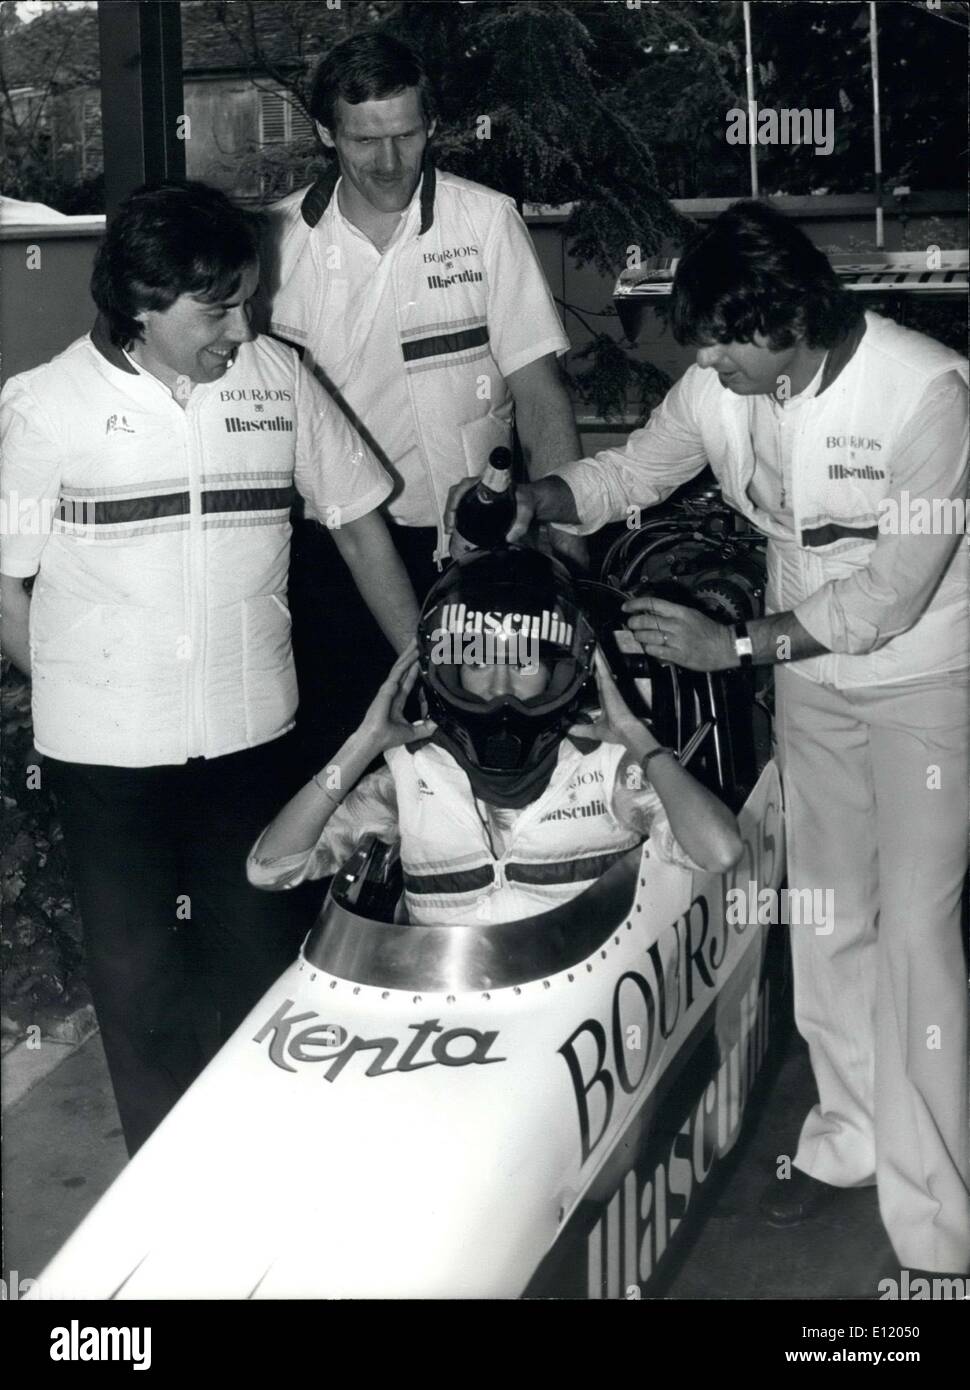 Apr. 30, 1981 - Les Parfum Bourjois,' one of the leaders of French perfumes now have a French six meter drag racing car from the United States. Sweden's Kenta Presson, the European champion, will go through France's large cities in the car for the next four months. Here is Presson's sponsor, Anne Aprillaud, in the new race car. Stock Photo